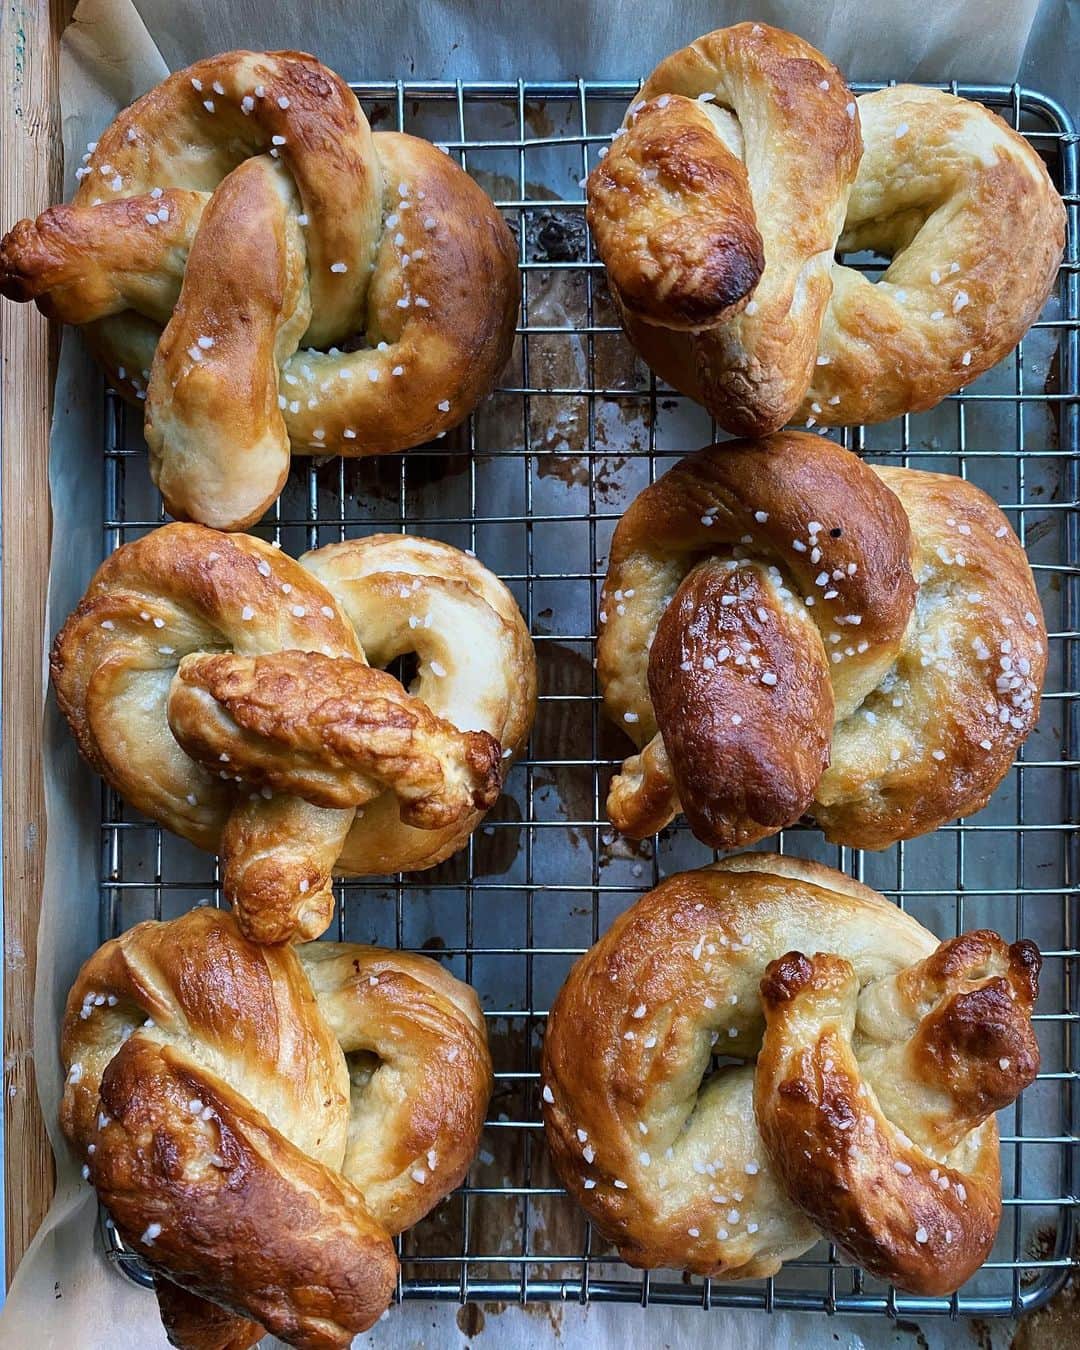 Antonietteのインスタグラム：「Being knotty today. 😜 🥨 Oktoberfest vibes, so made some soft buttery pretzels to go with some beer.  Recipe by @kingarthurbaking. Tried to get the, “praying hands” twist right but the dough kept unfurling and now my pretzels look like they’re trying to cross their legs. 🦵🏼 🦵🏼 Now I can’t unsee this! 😆Prost! 🍻」